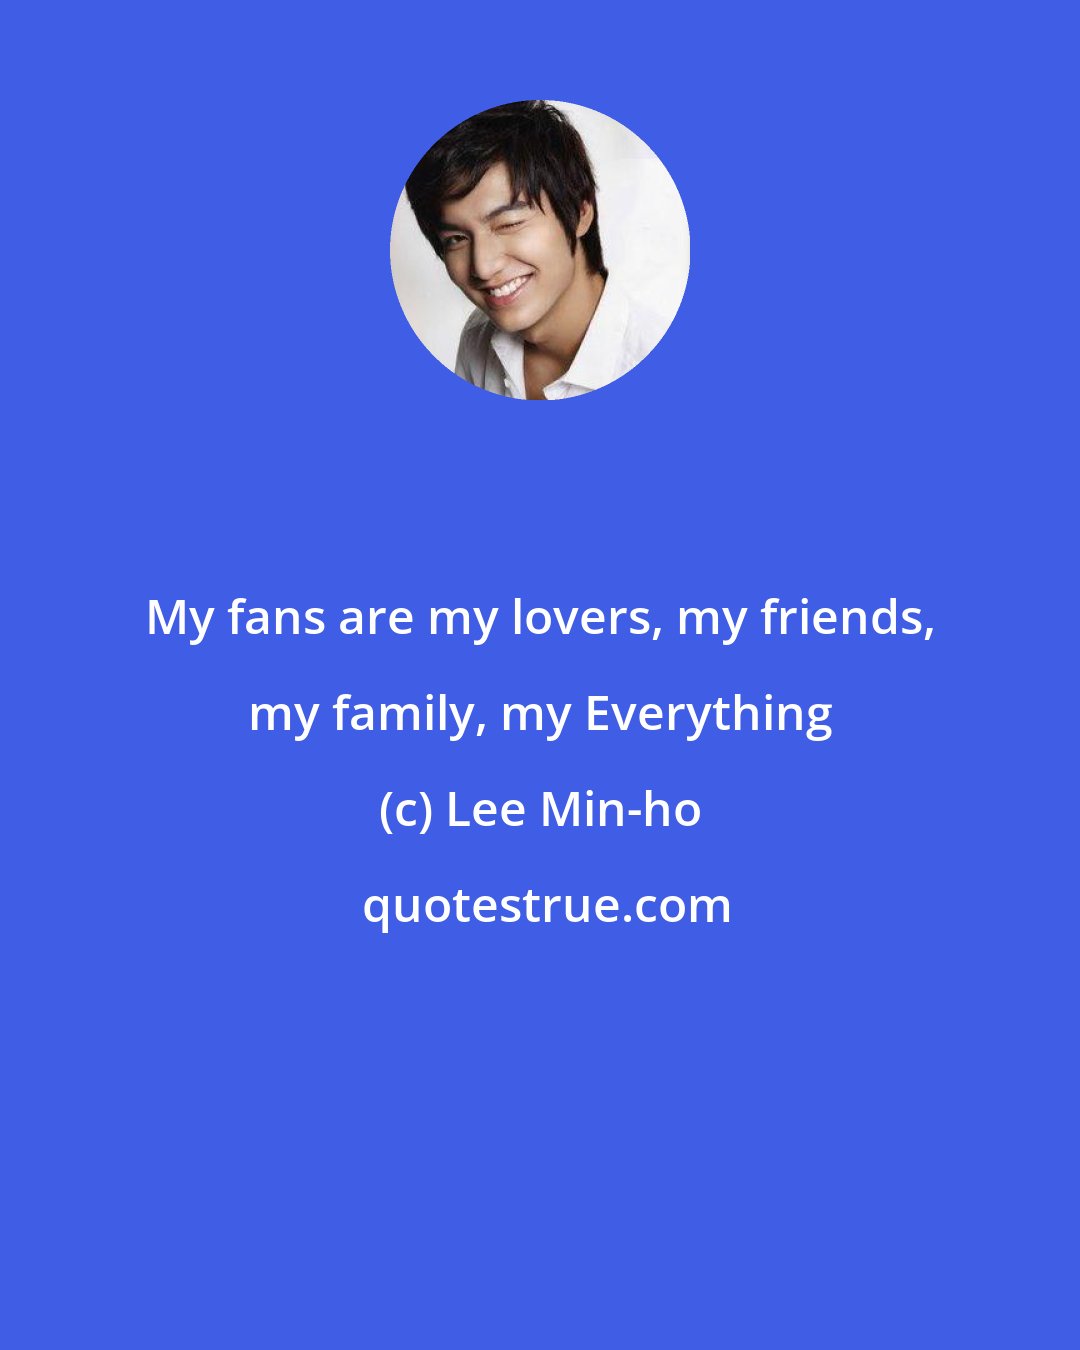 Lee Min-ho: My fans are my lovers, my friends, my family, my Everything